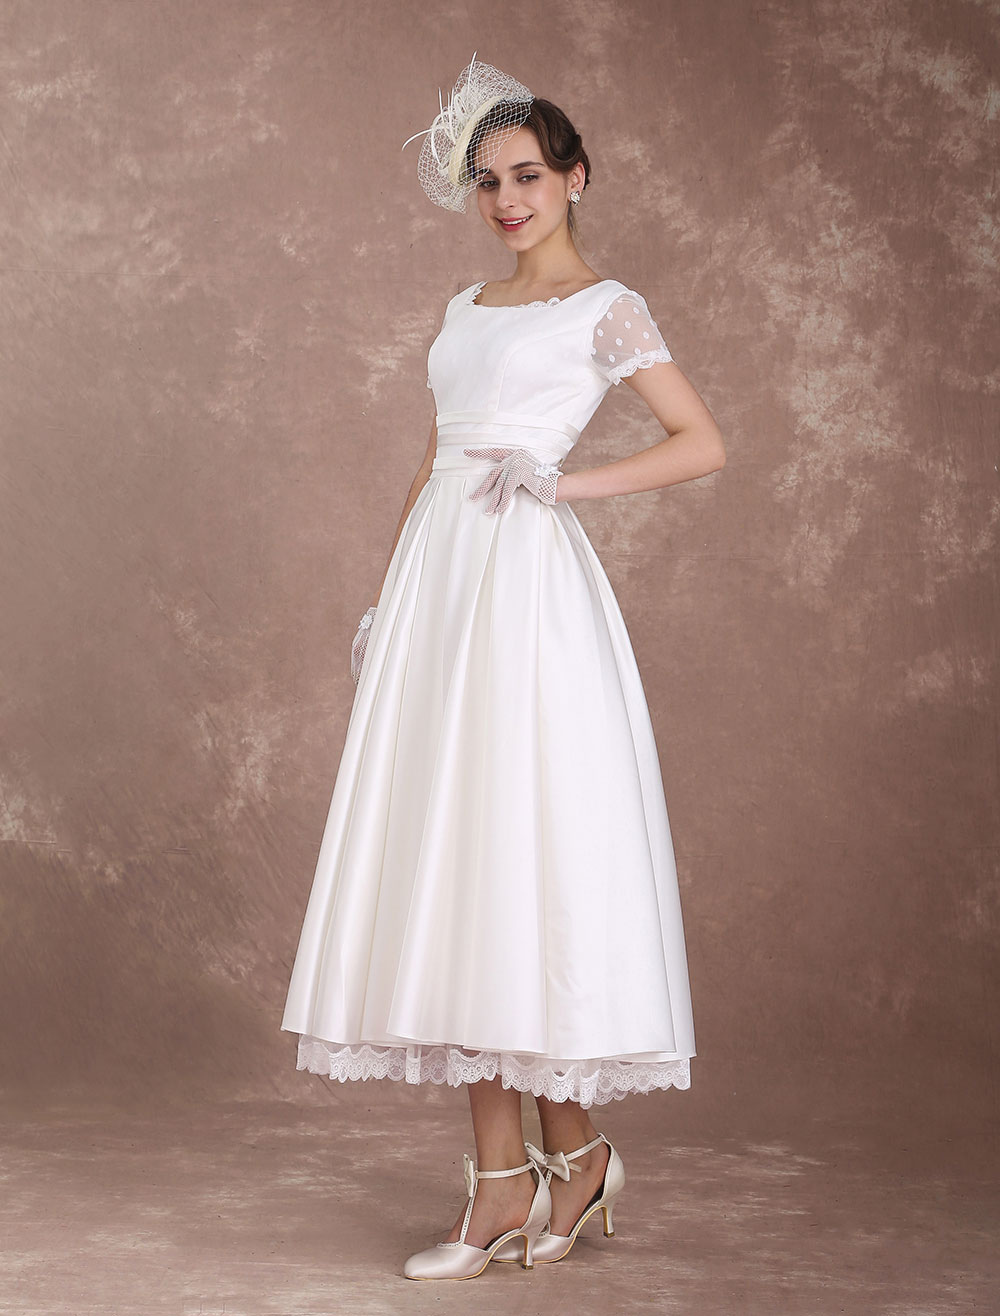 Top Wedding Dress 1950s of the decade Check it out now 